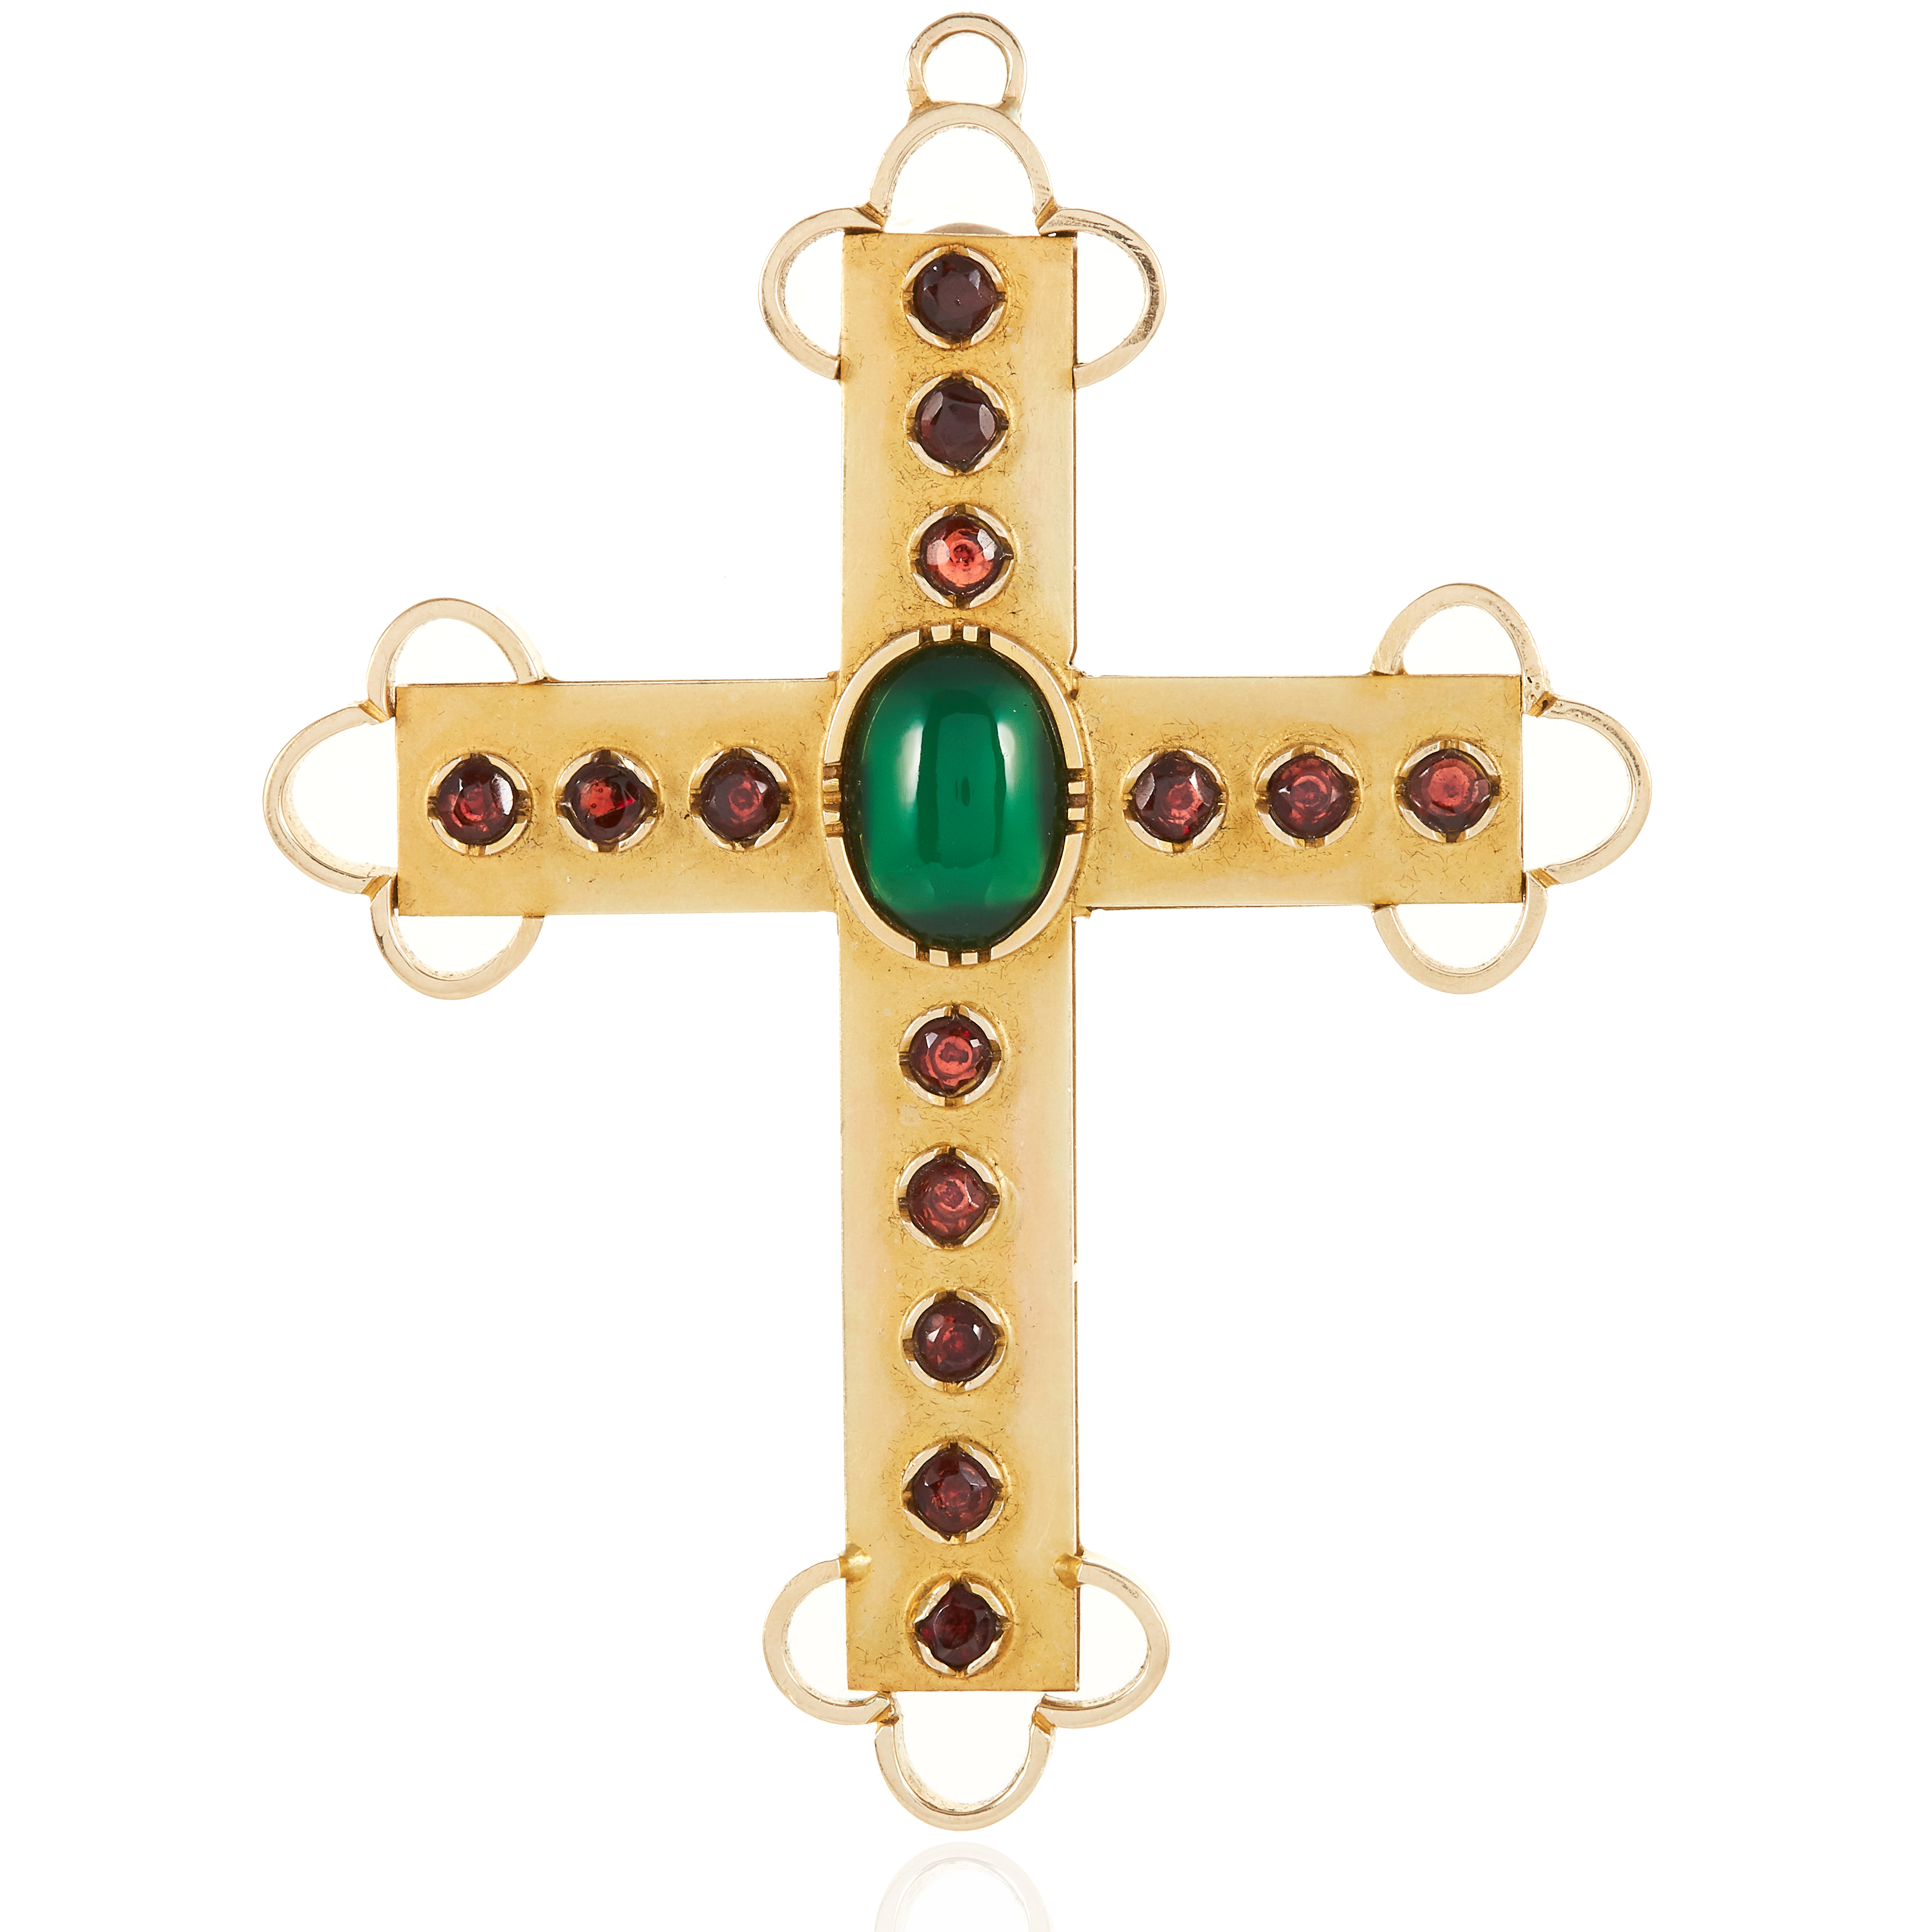 AN ANTIQUE GARNET AND CHRYSOPRASE CROSS PENDANT in yellow gold, set with an oval cabochon